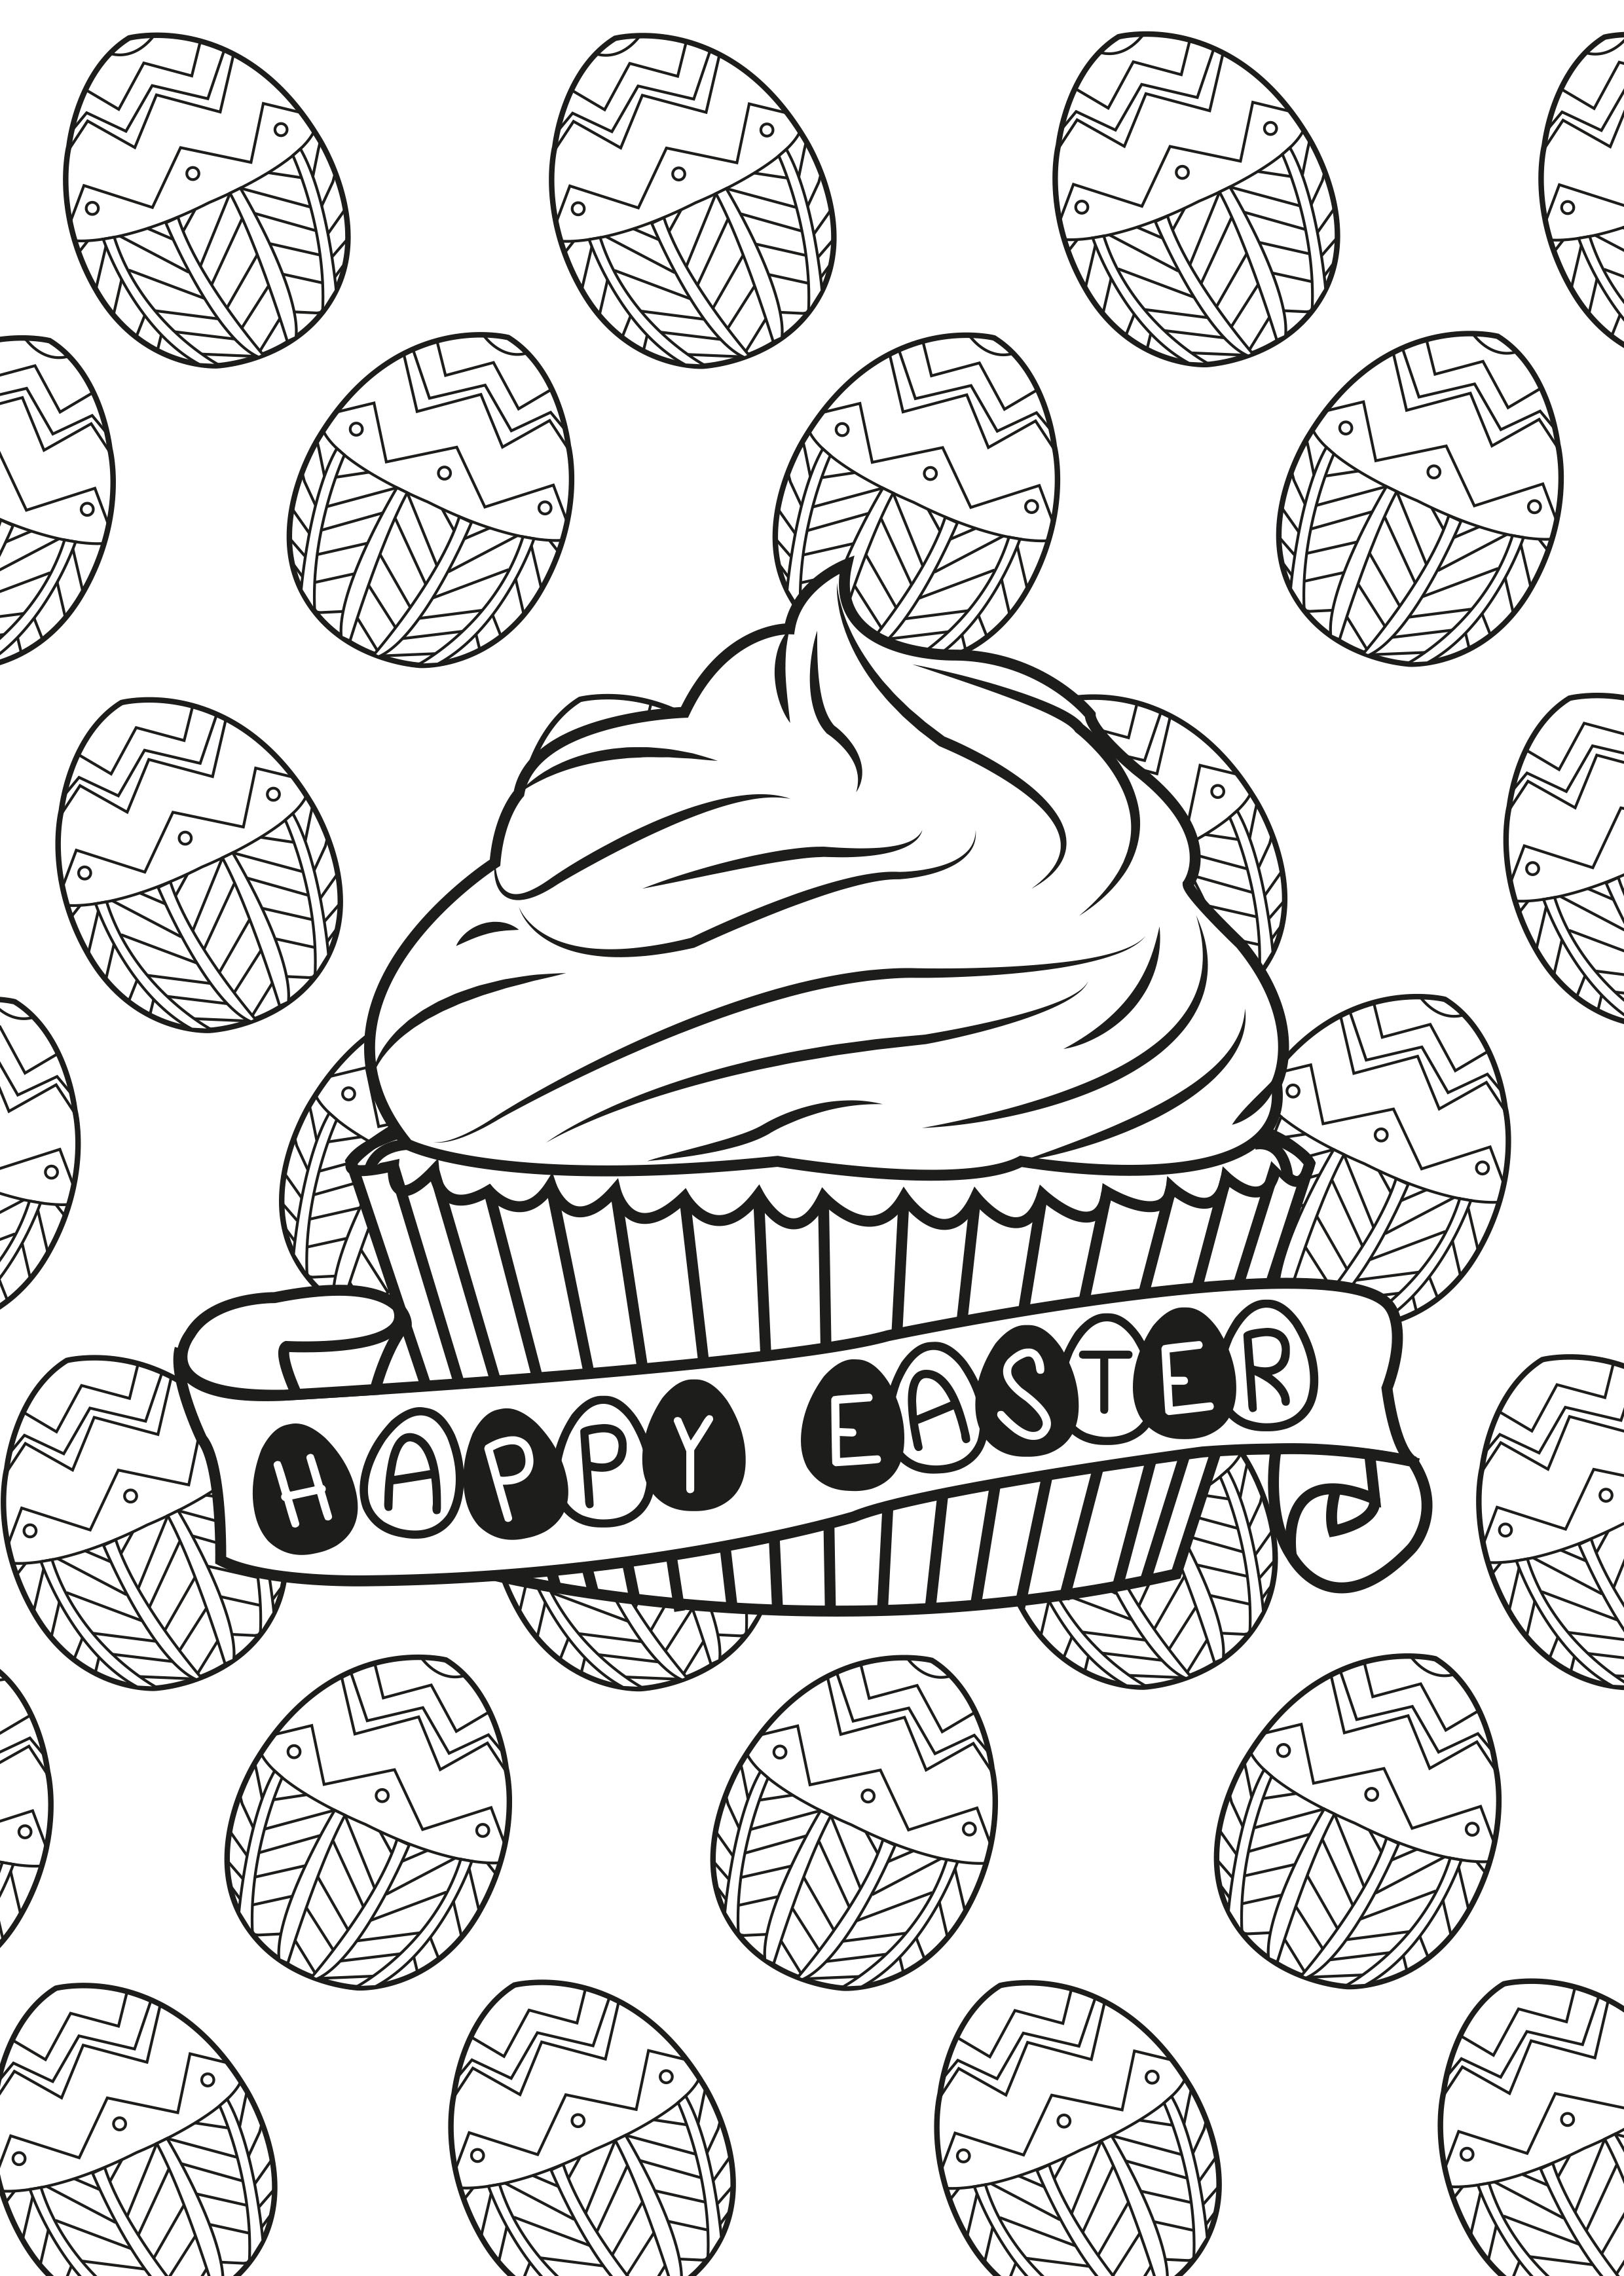 Coloring Pages For Adults Easter Coloring Ideas Coloring Page Adult Easter Egg Muffin Allan On